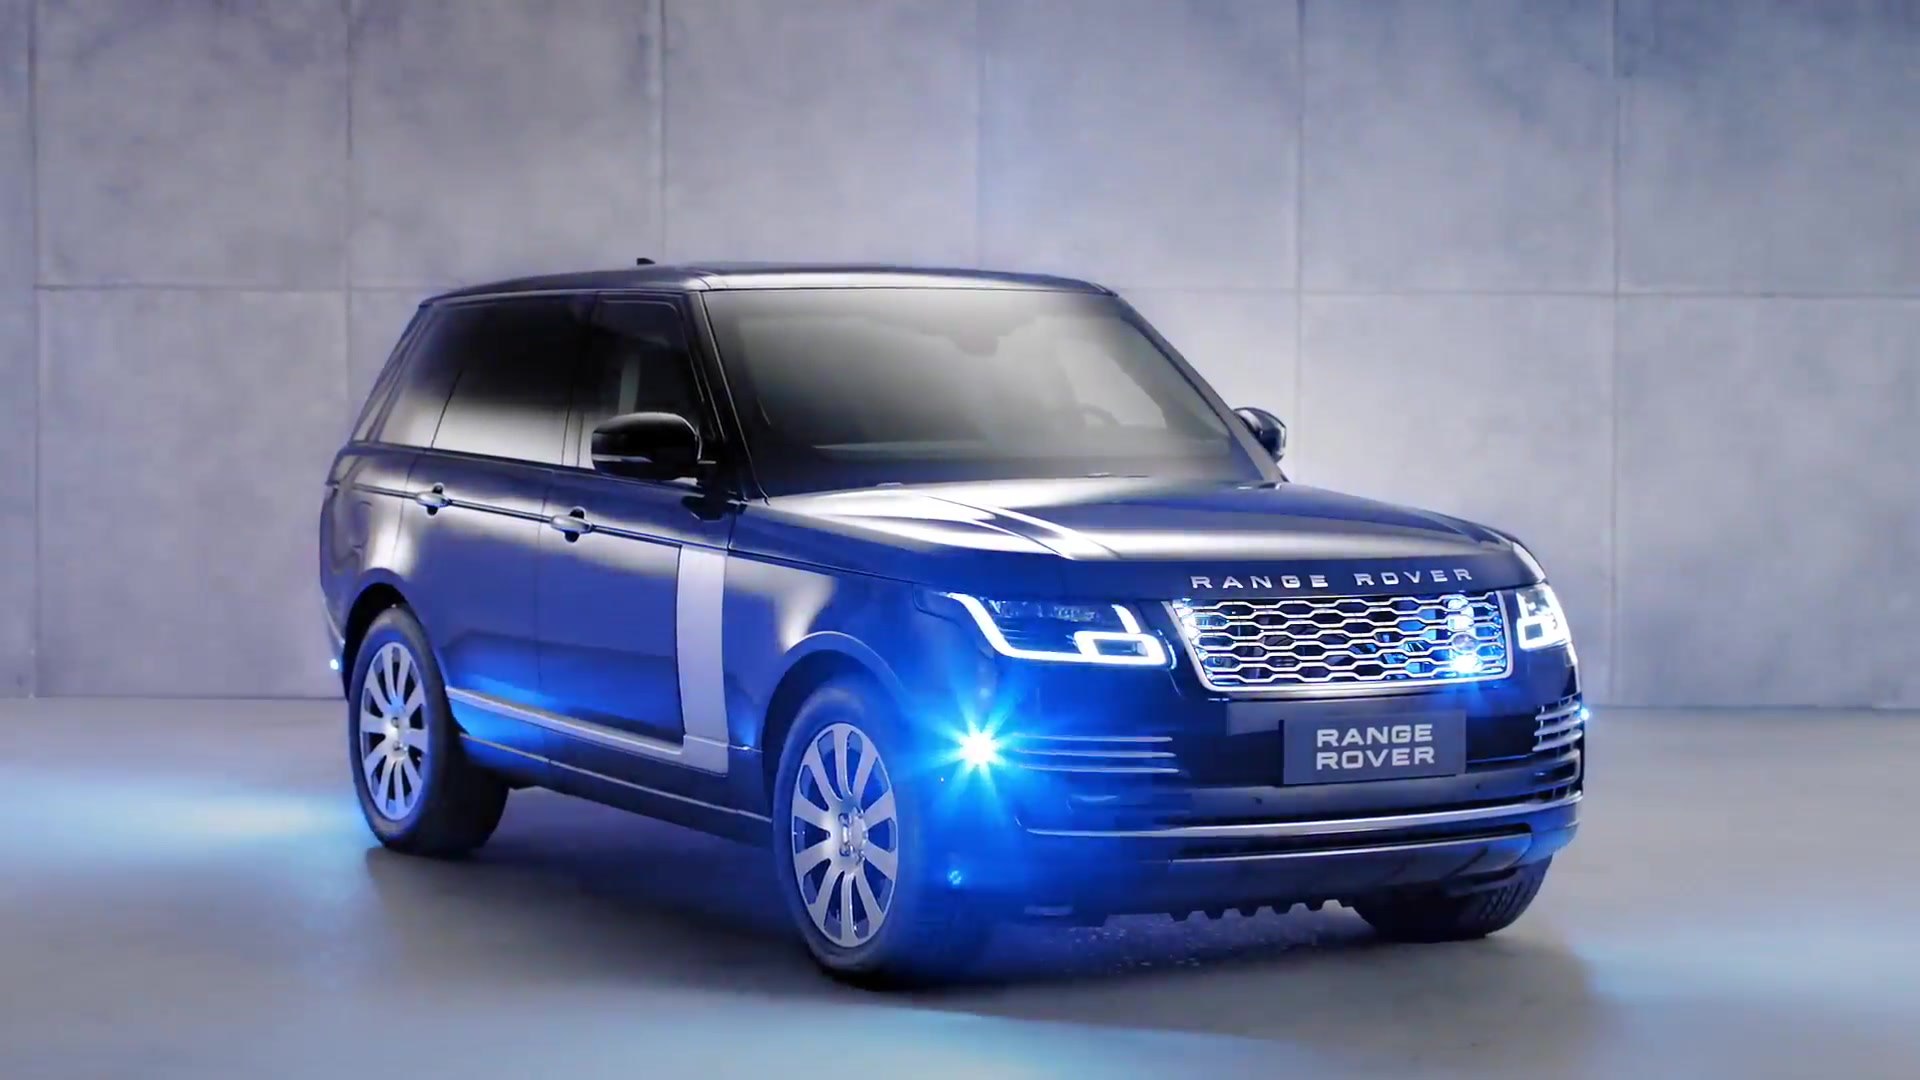 Range Rover Sentinel in Test - video Dailymotion